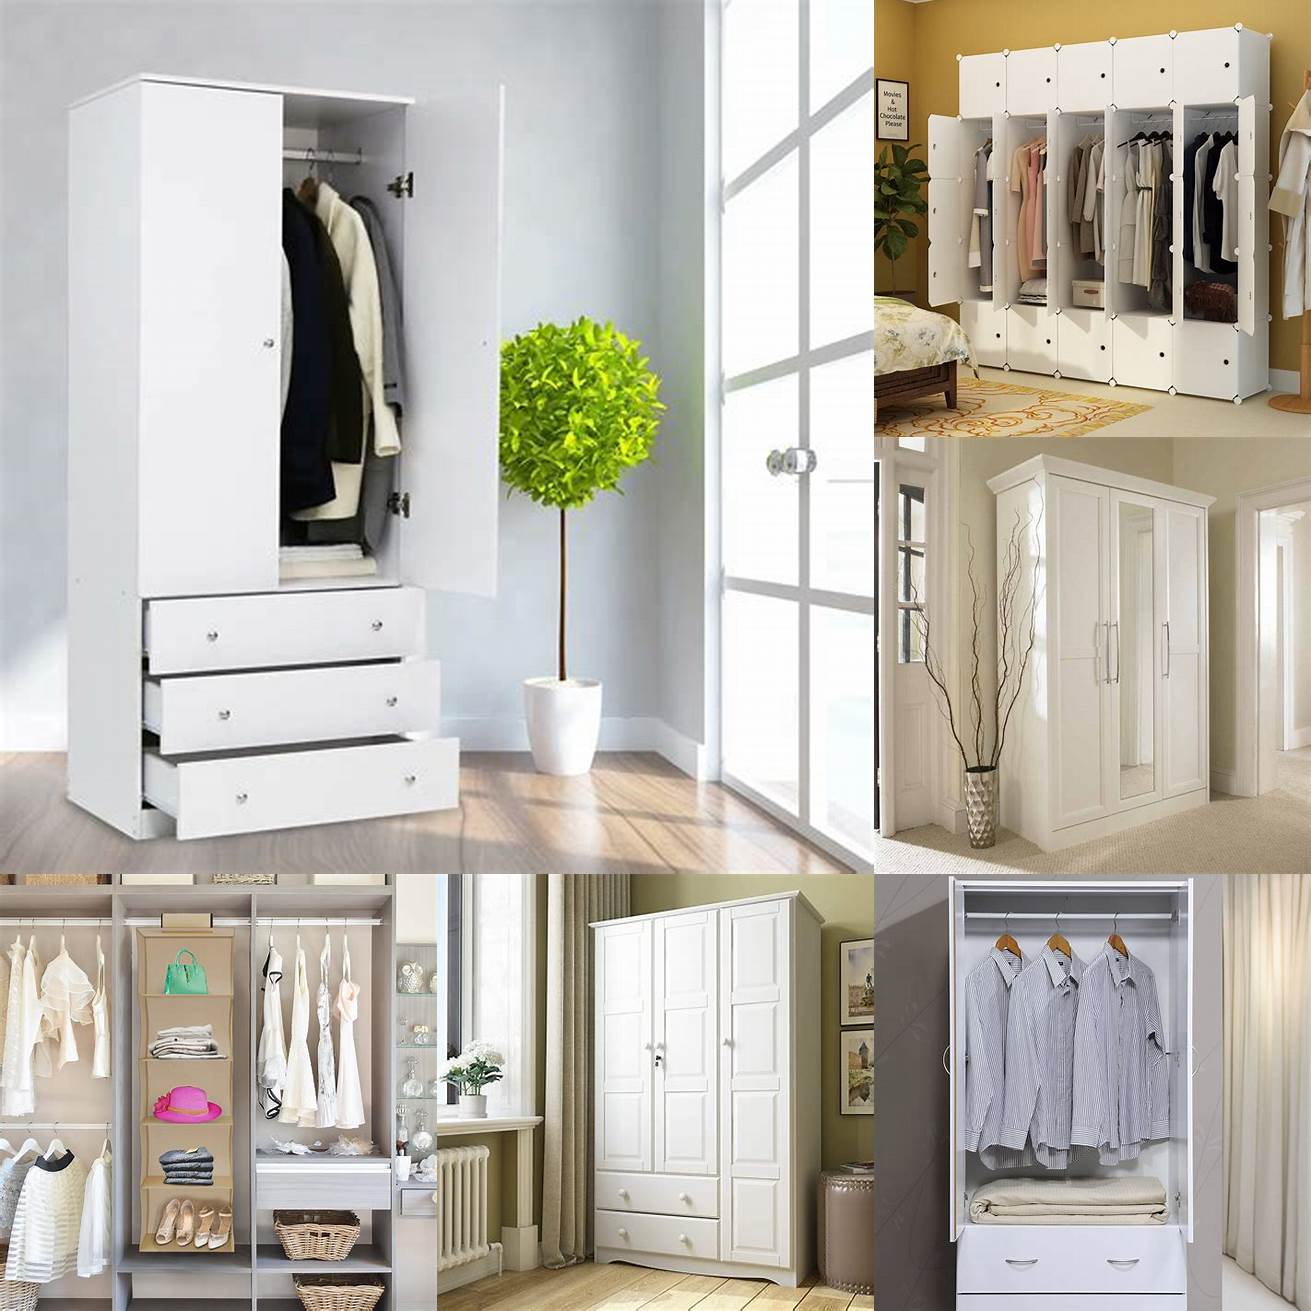 Wardrobe Armoires These are designed specifically for storing clothes and have hanging space and drawers inside